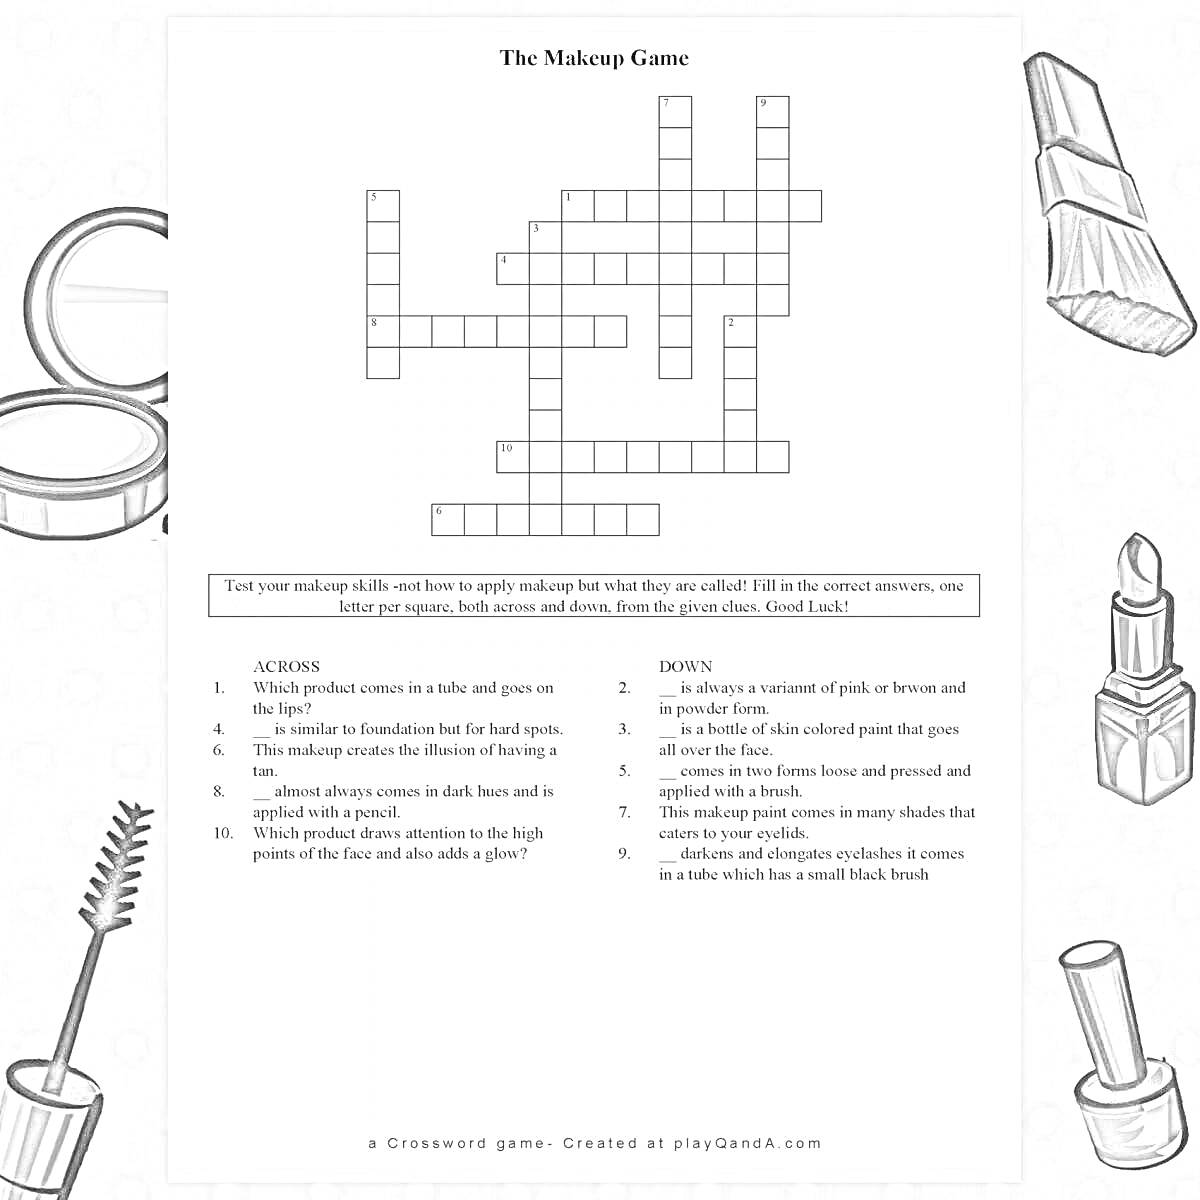 Раскраска The Makeup Game - Crossword with Makeup Items